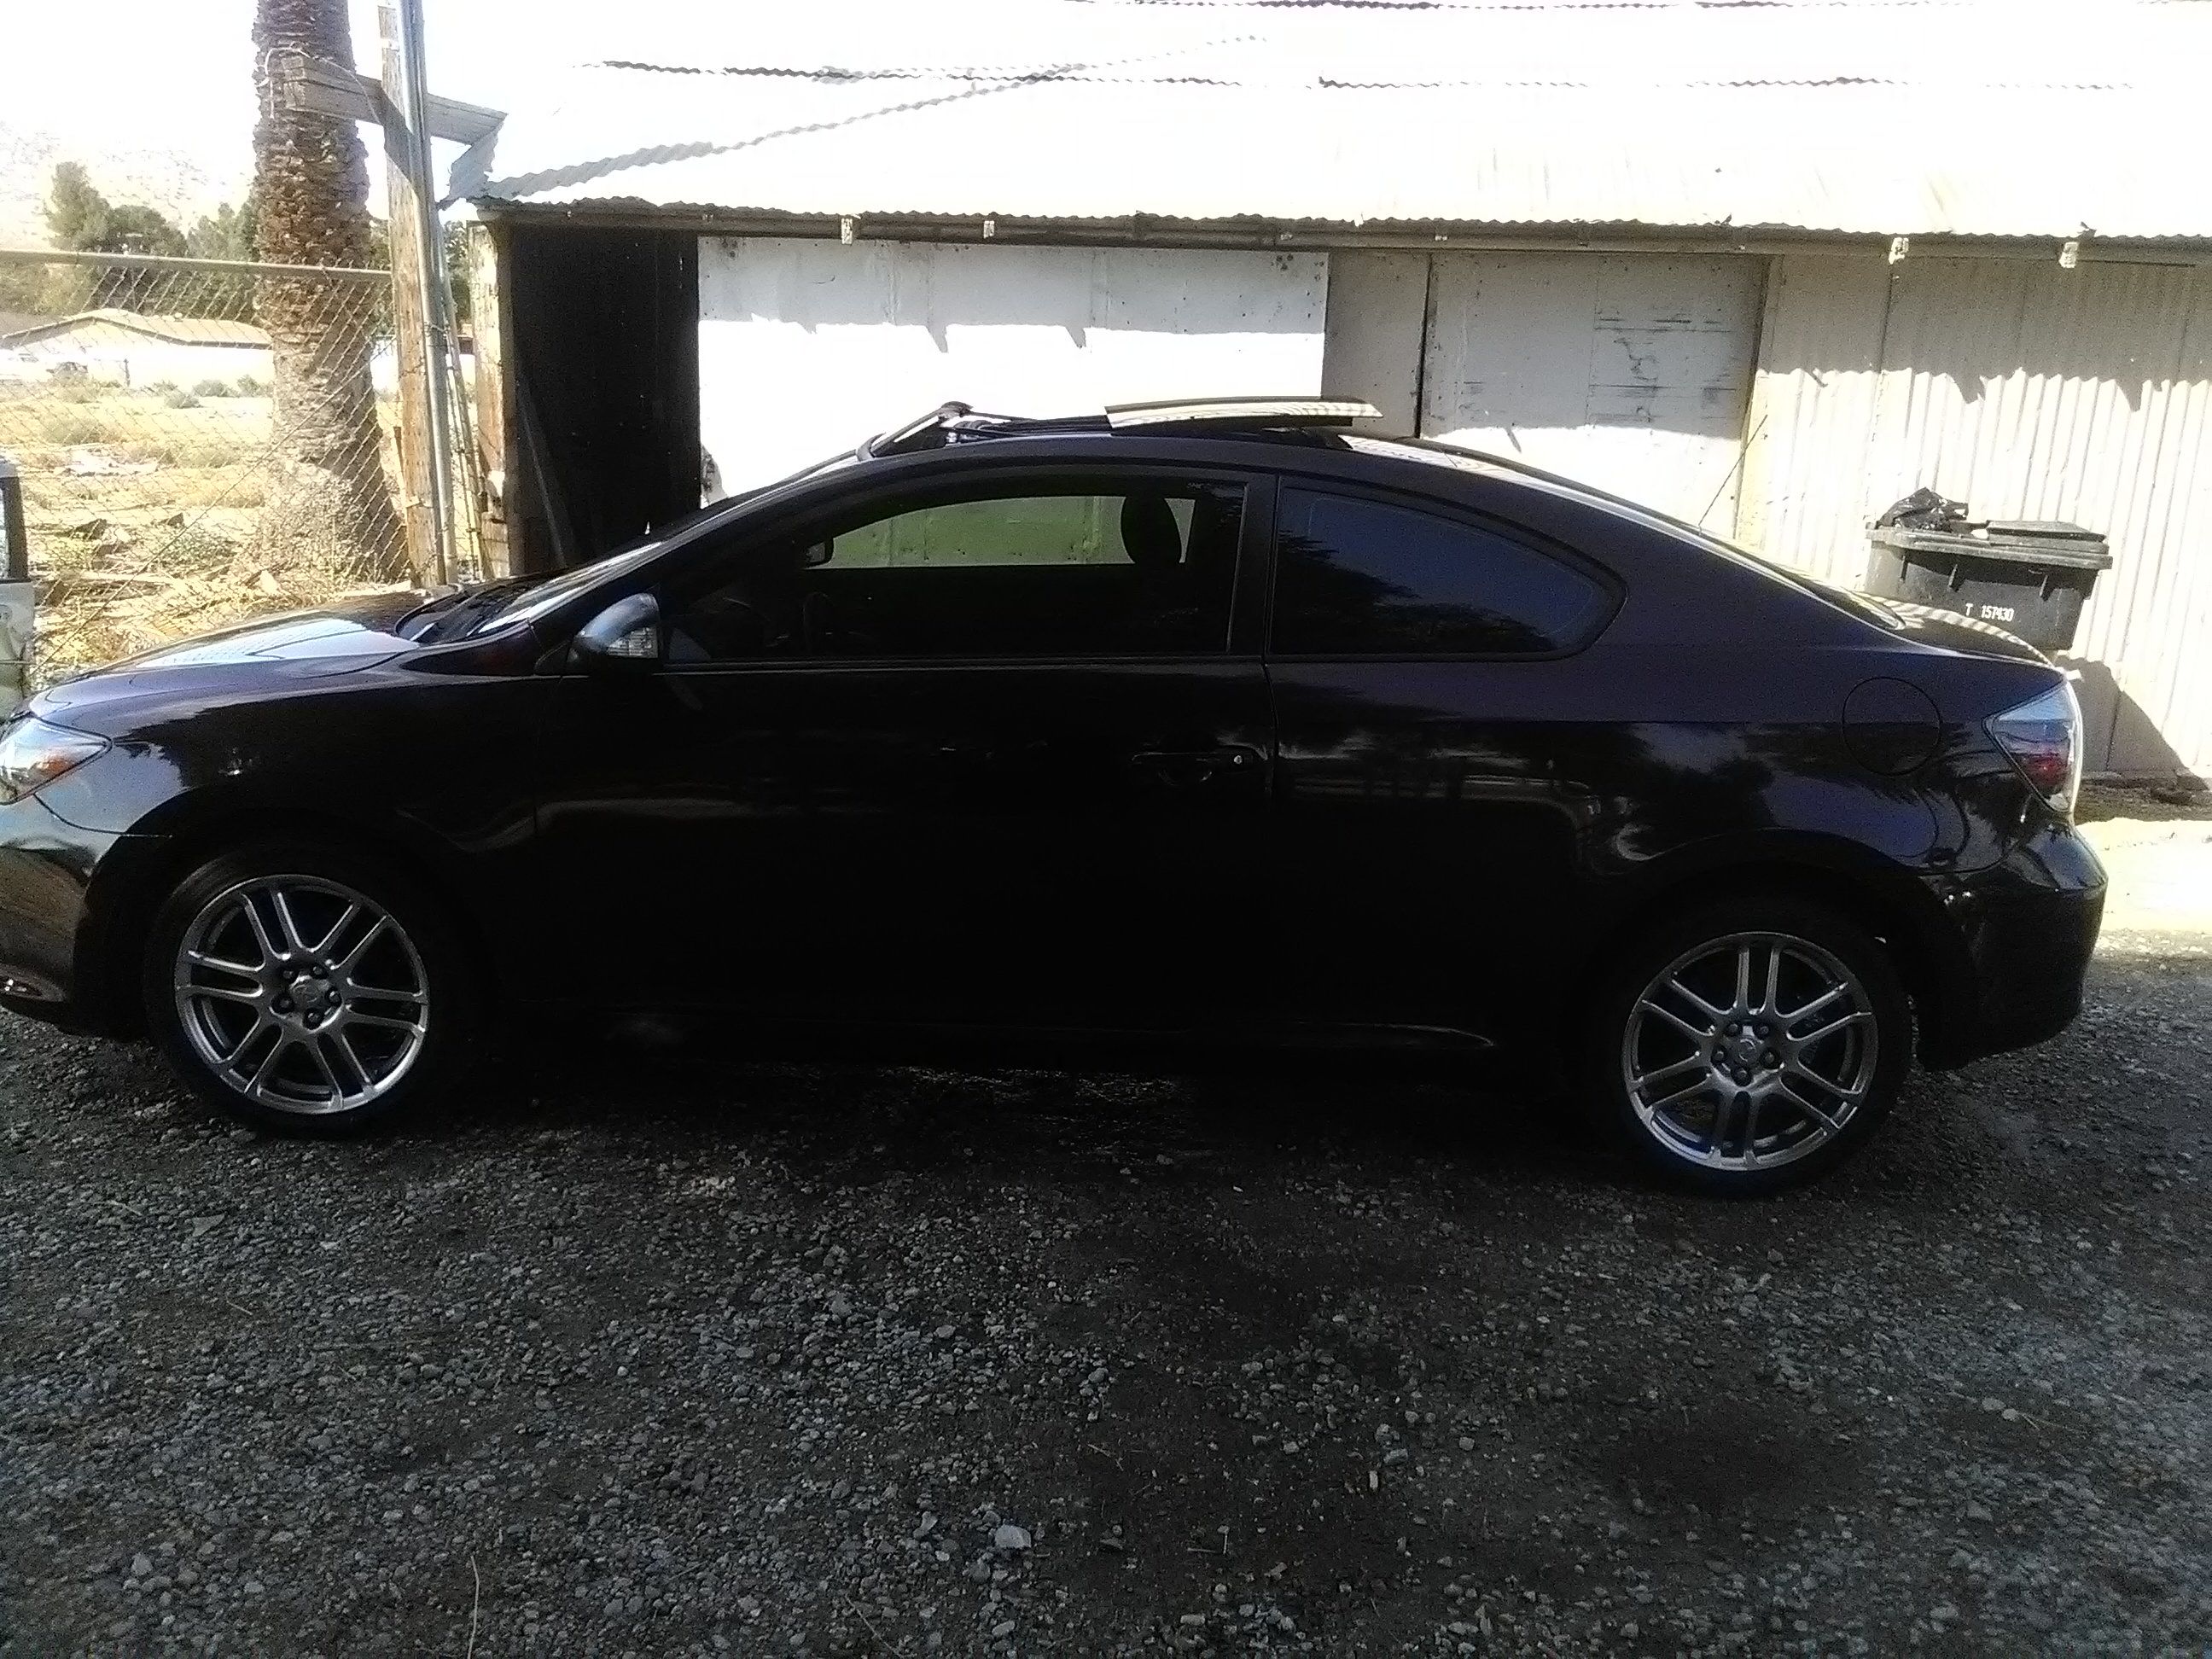 2010 TOYOTA SCION TC FULLY LOADED RUNNING EXCELLENT NO ISSUES